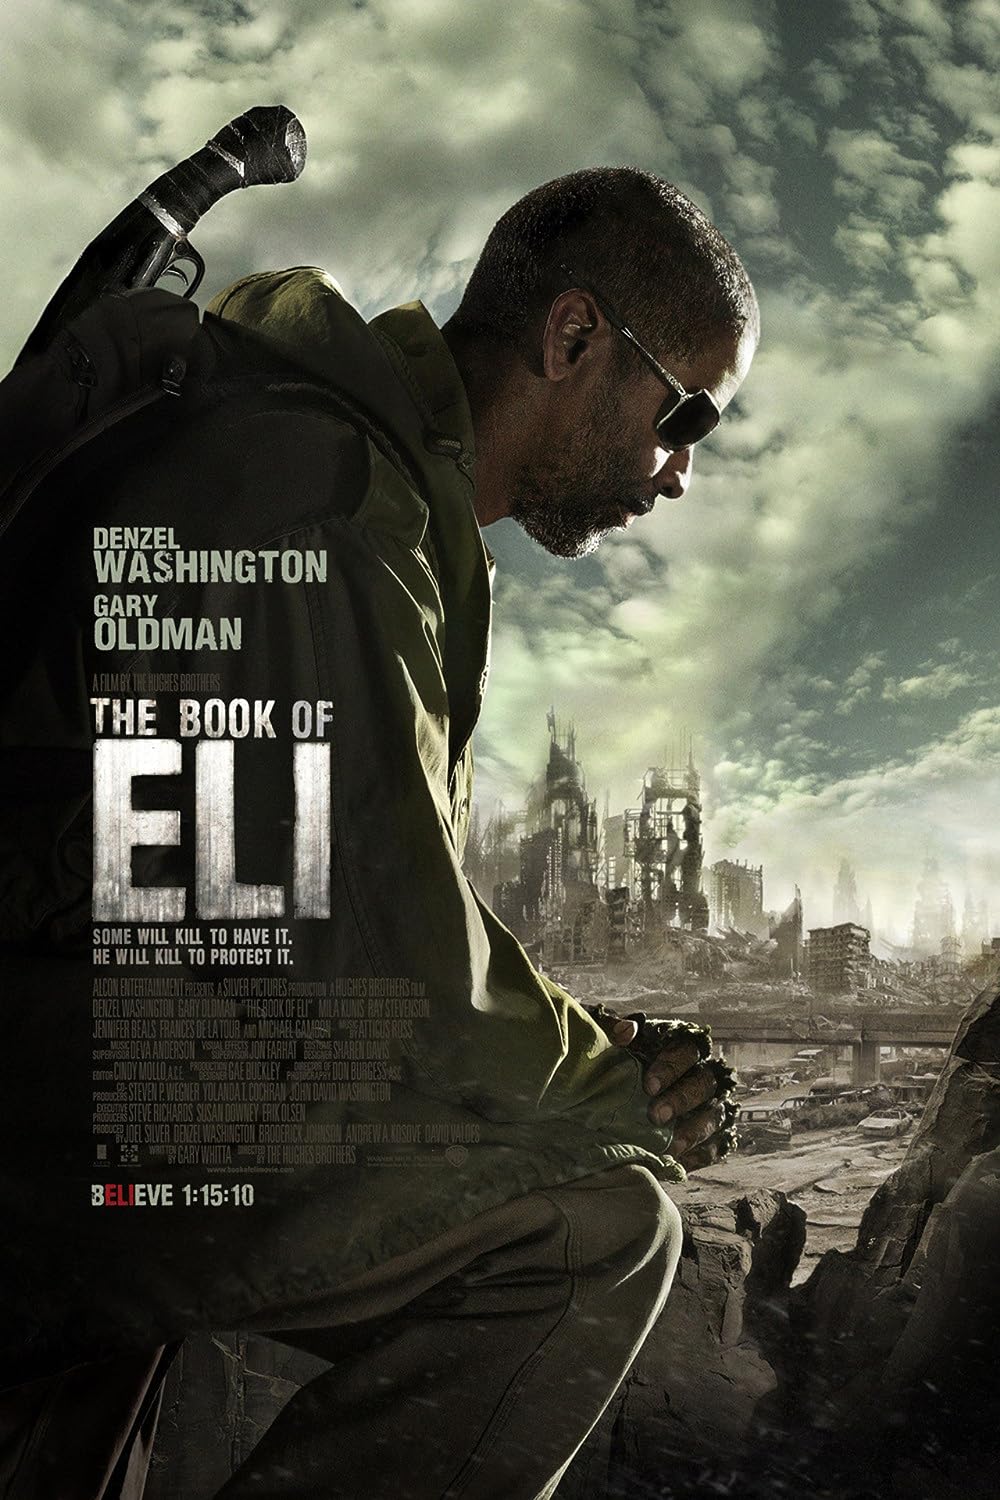 Written by Gary Whitta and directed by The Hughes Brothers, The Book of Eli stars Denzel Washington as Eli, a lone traveler in a post-apocalyptic United States. Released in 2010, the film follows Eli's journey to safeguard a mysterious book from a dangerous group seeking to manipulate people with its contents. 